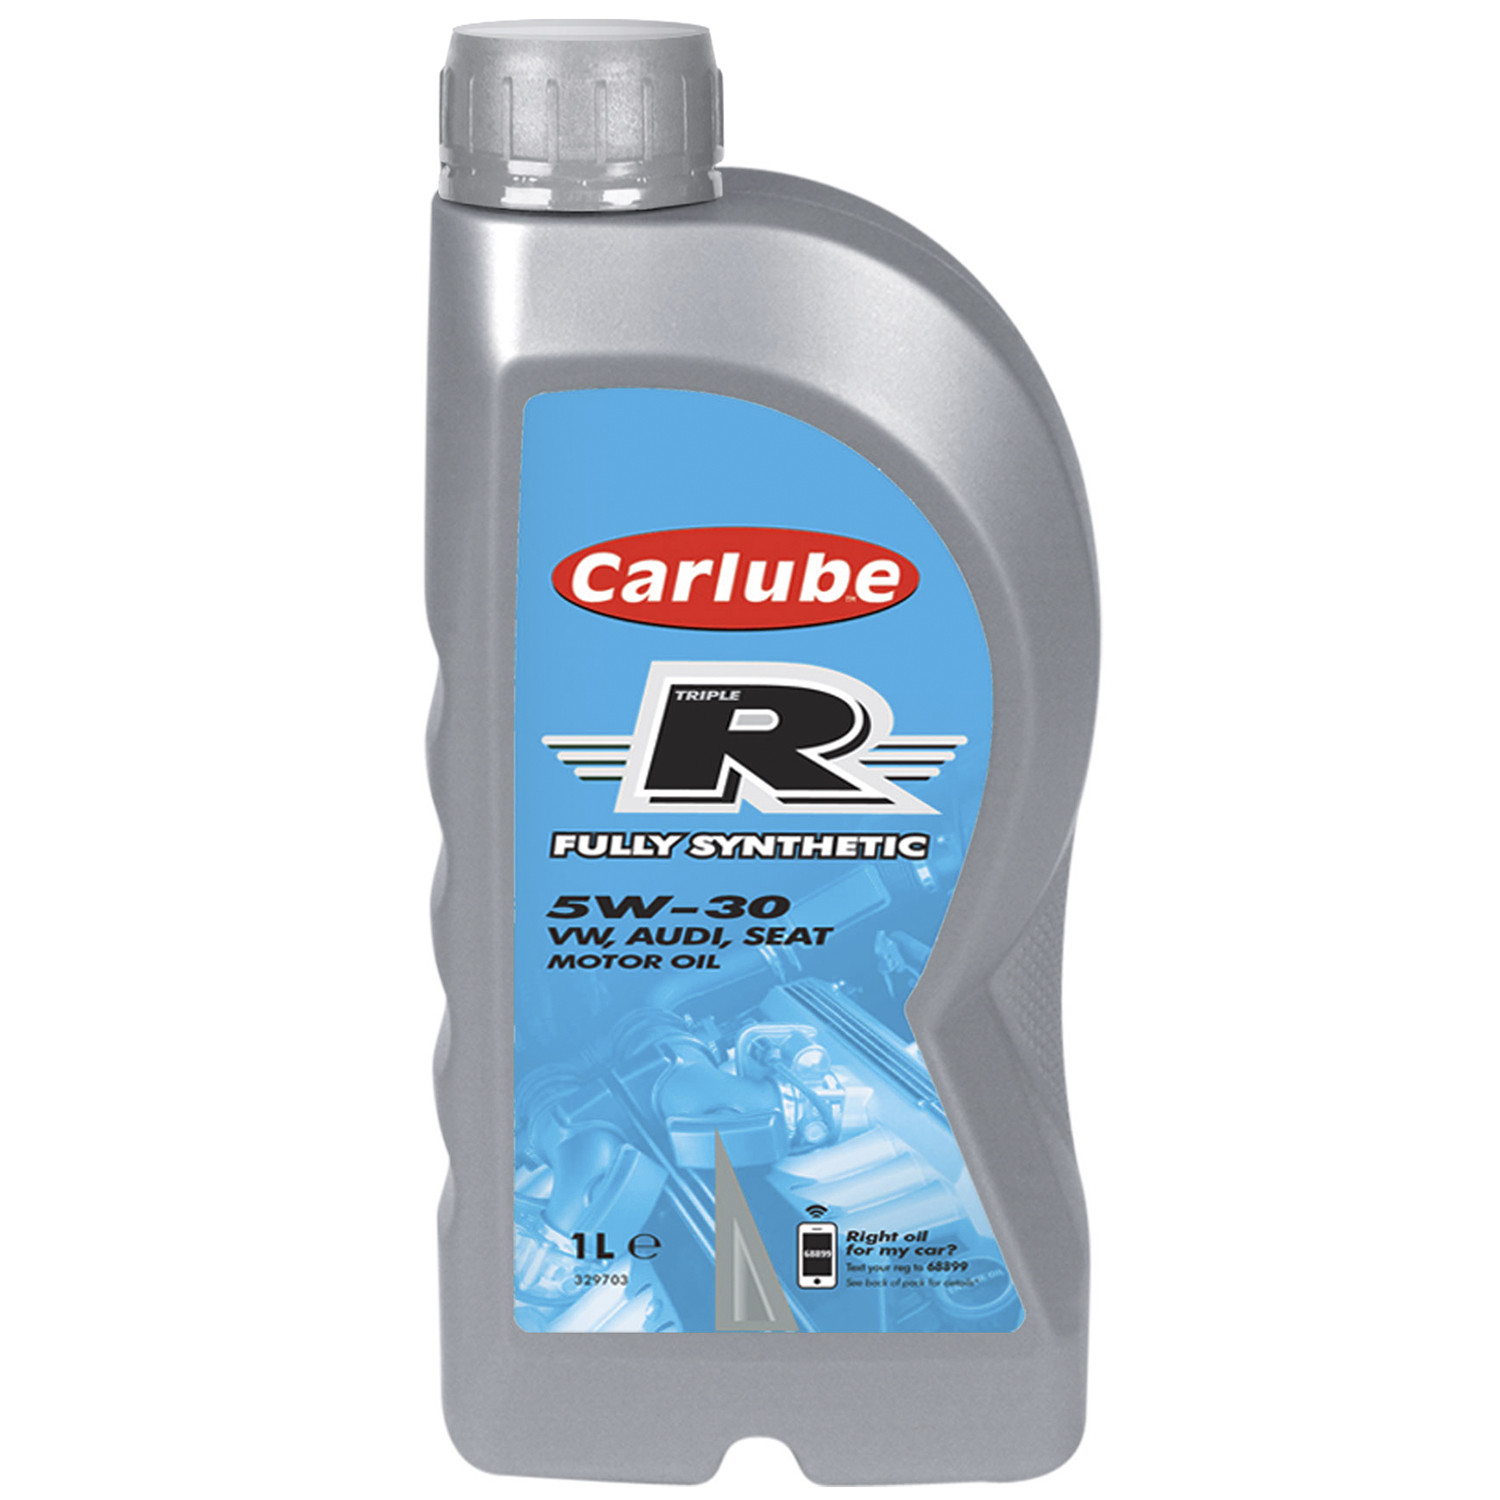 Carlube Triple R Fully Synthetic 5W30 VW and Audi Motor Engine Oil 1L Image